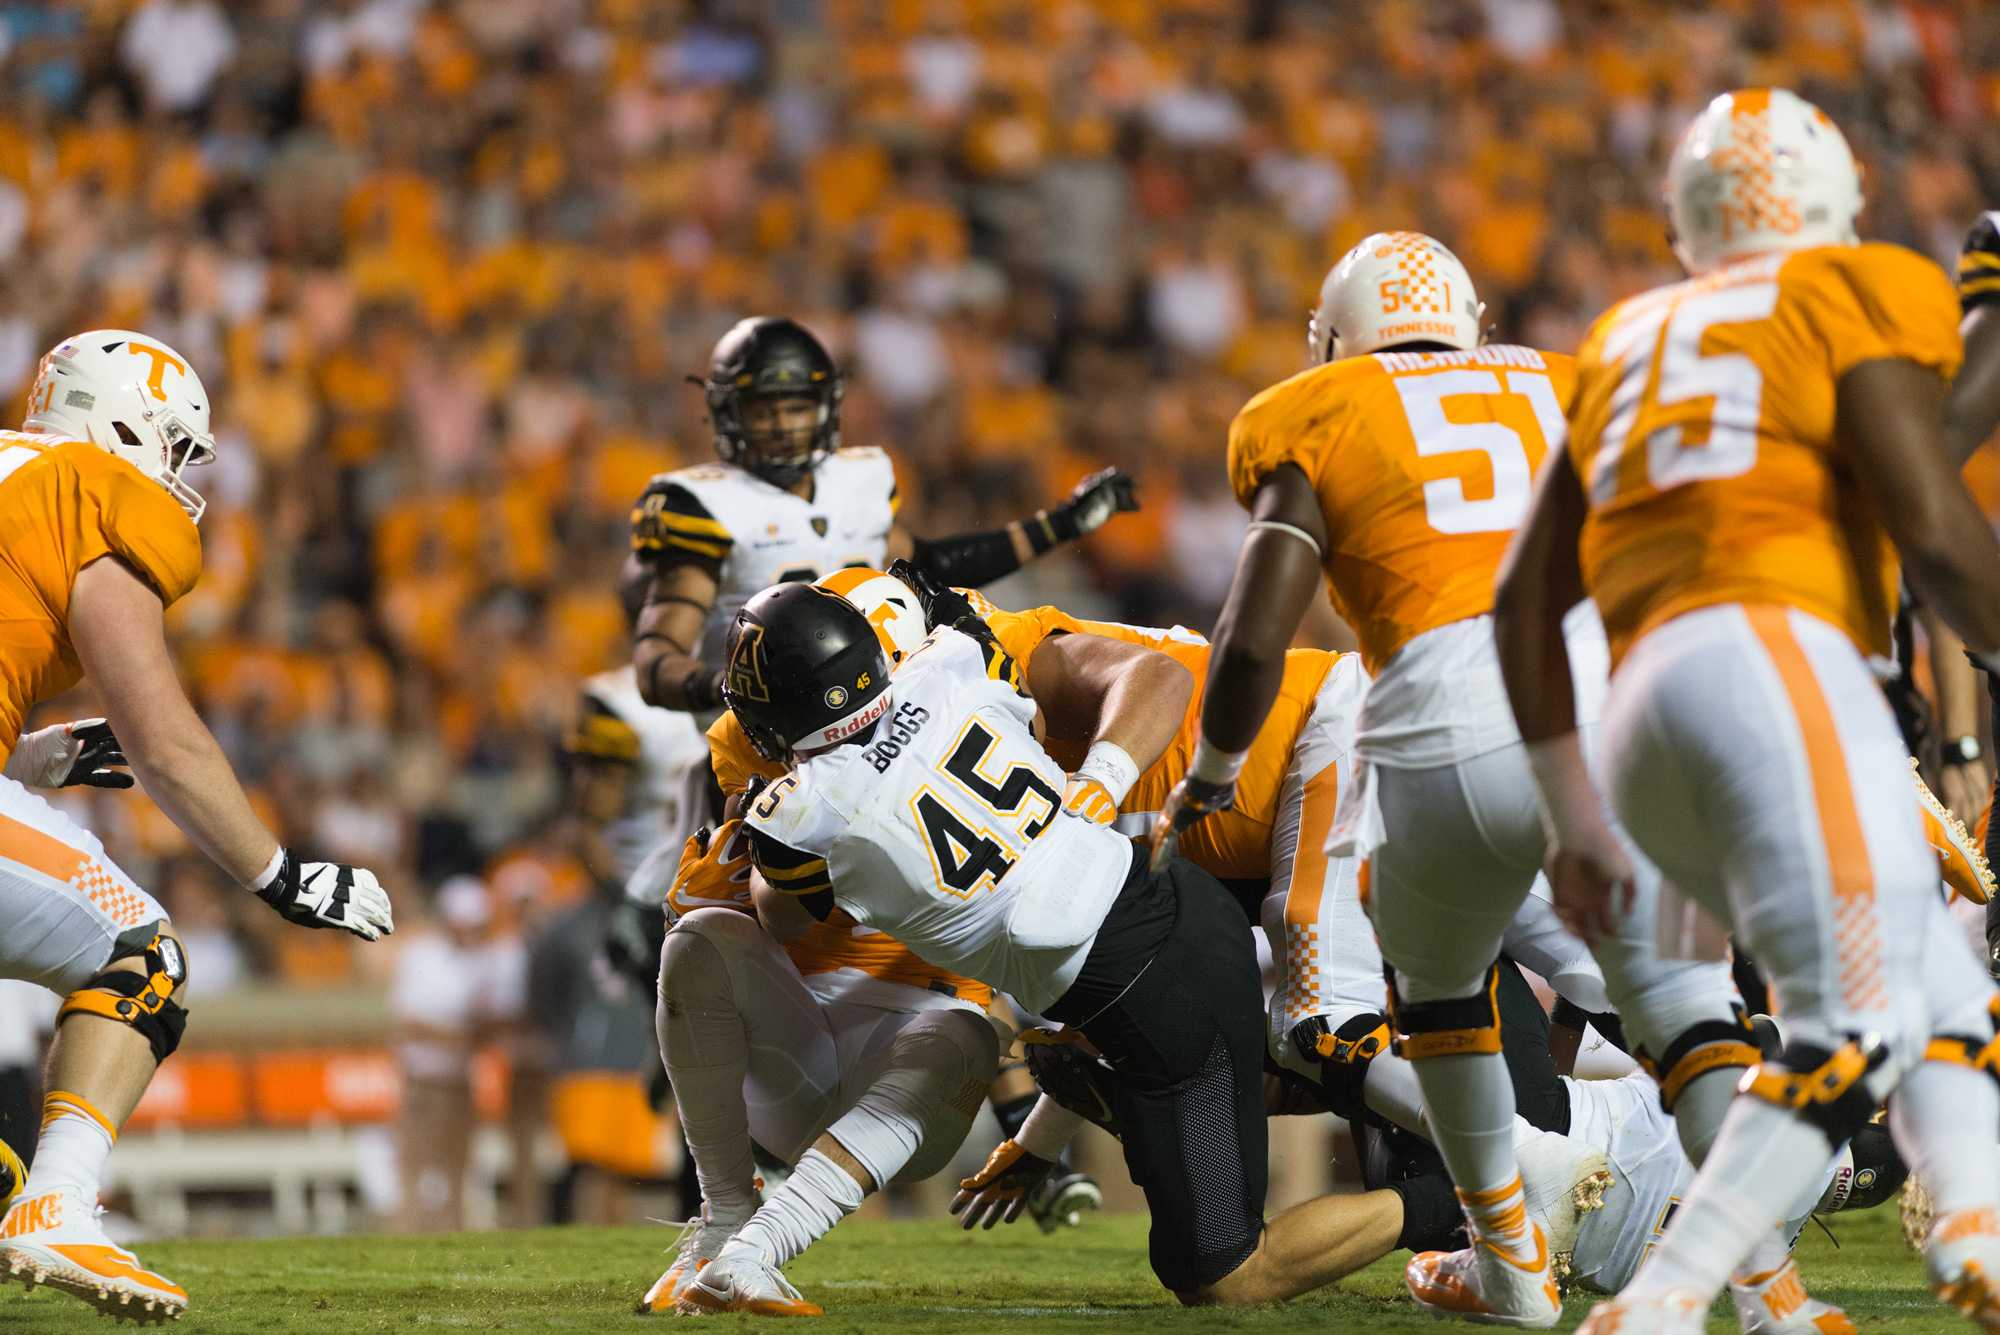 Junior inside linebacker Eric Boggs with one of his 12 tackles on the night of a hard fought game by the Mountaineers.